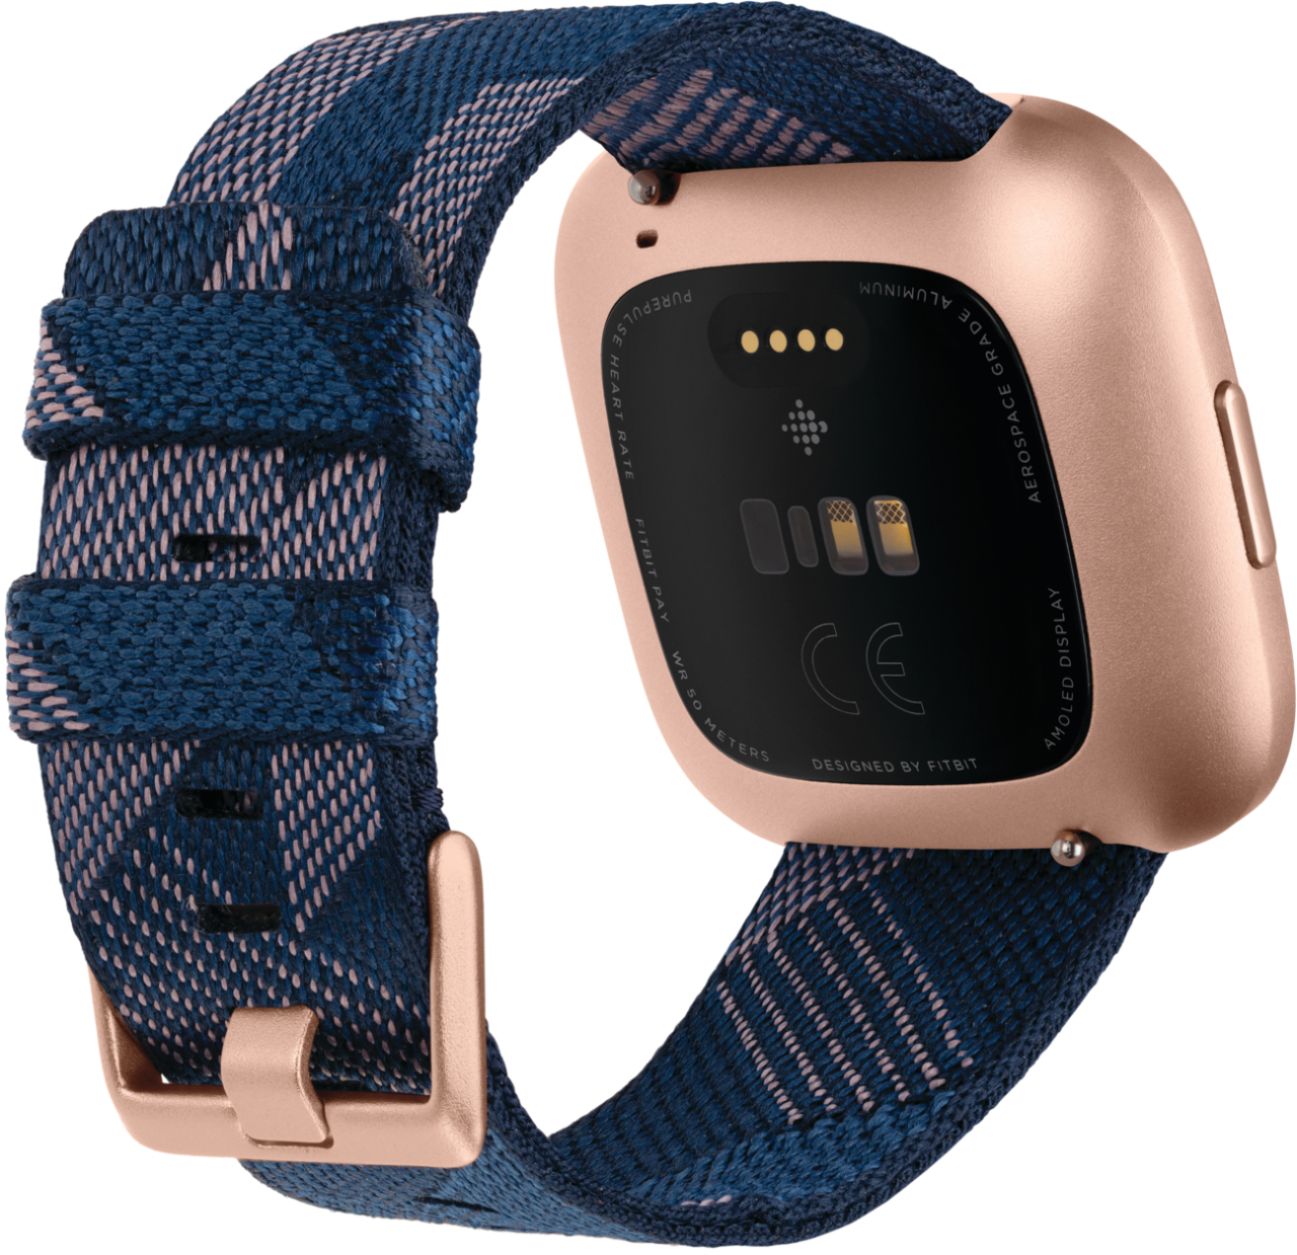 fitbit versa 2 special edition blue